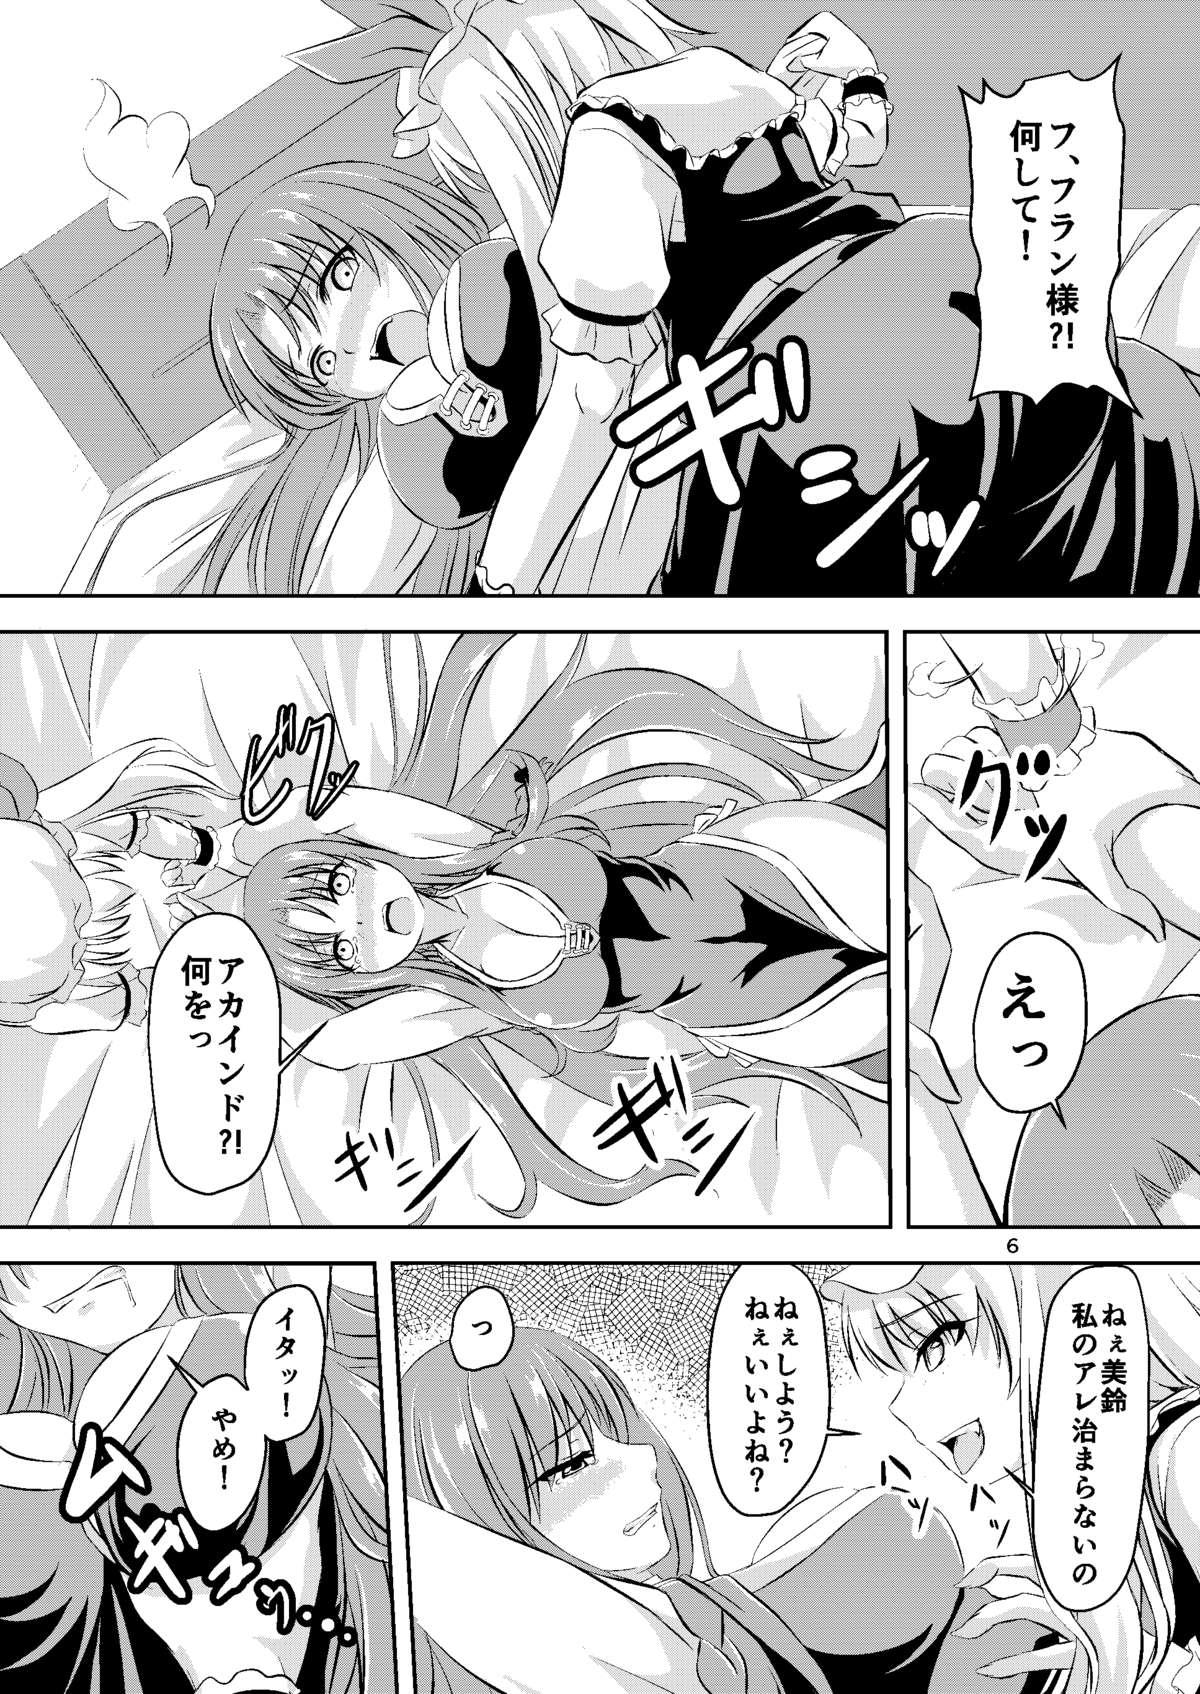 Tease 幻想男娘紅魔館!フランドール - Touhou project Teen Fuck - Page 4